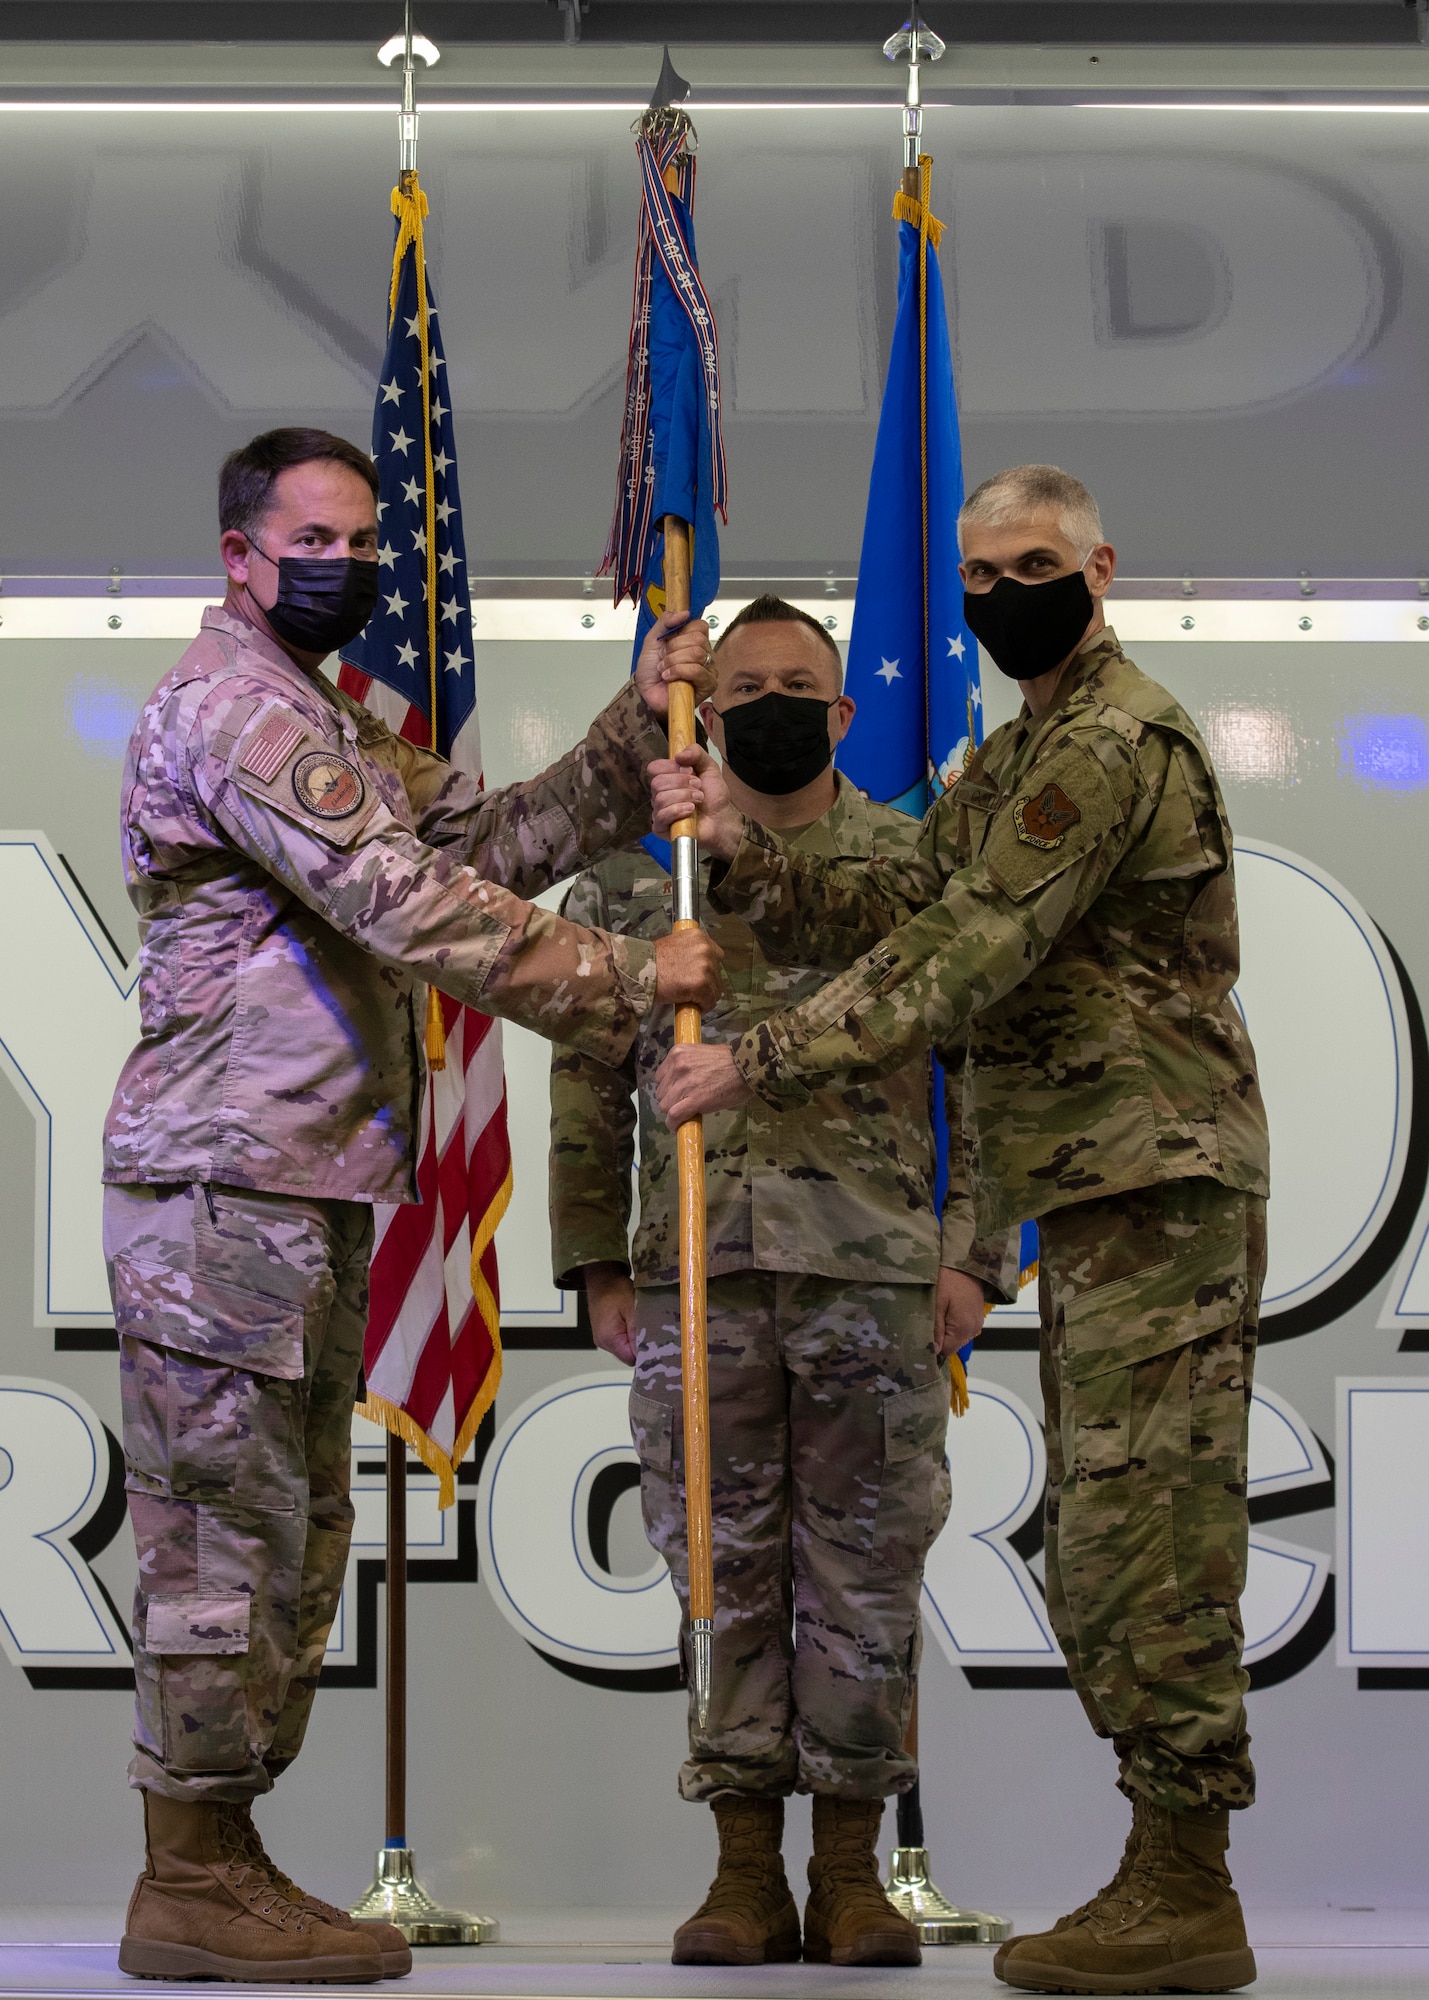 U.S. Air Force Col. Greg Moseley, 325th Fighter Wing commander, left, passes the guidon  to Col. Steven Collen, 325th Maintenance Group commander, right, during an assumption of command ceremony at Tyndall Air Force Base, Florida, May 11, 2021.